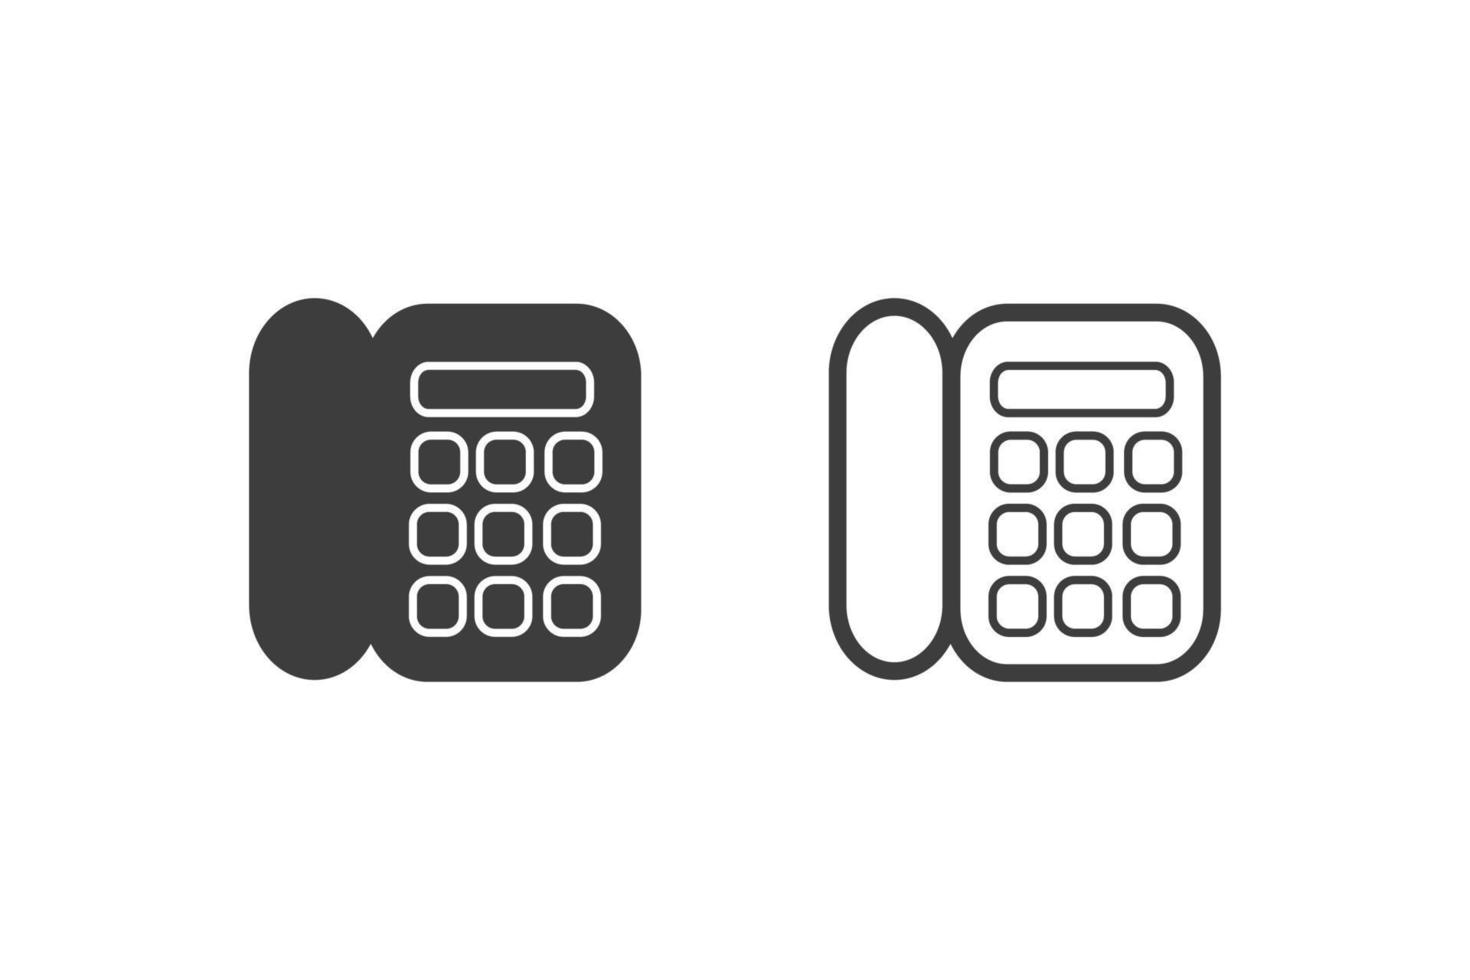 Telephone icon vector illustration glyph style design with 2 style icons black and white. Isolated on white background.